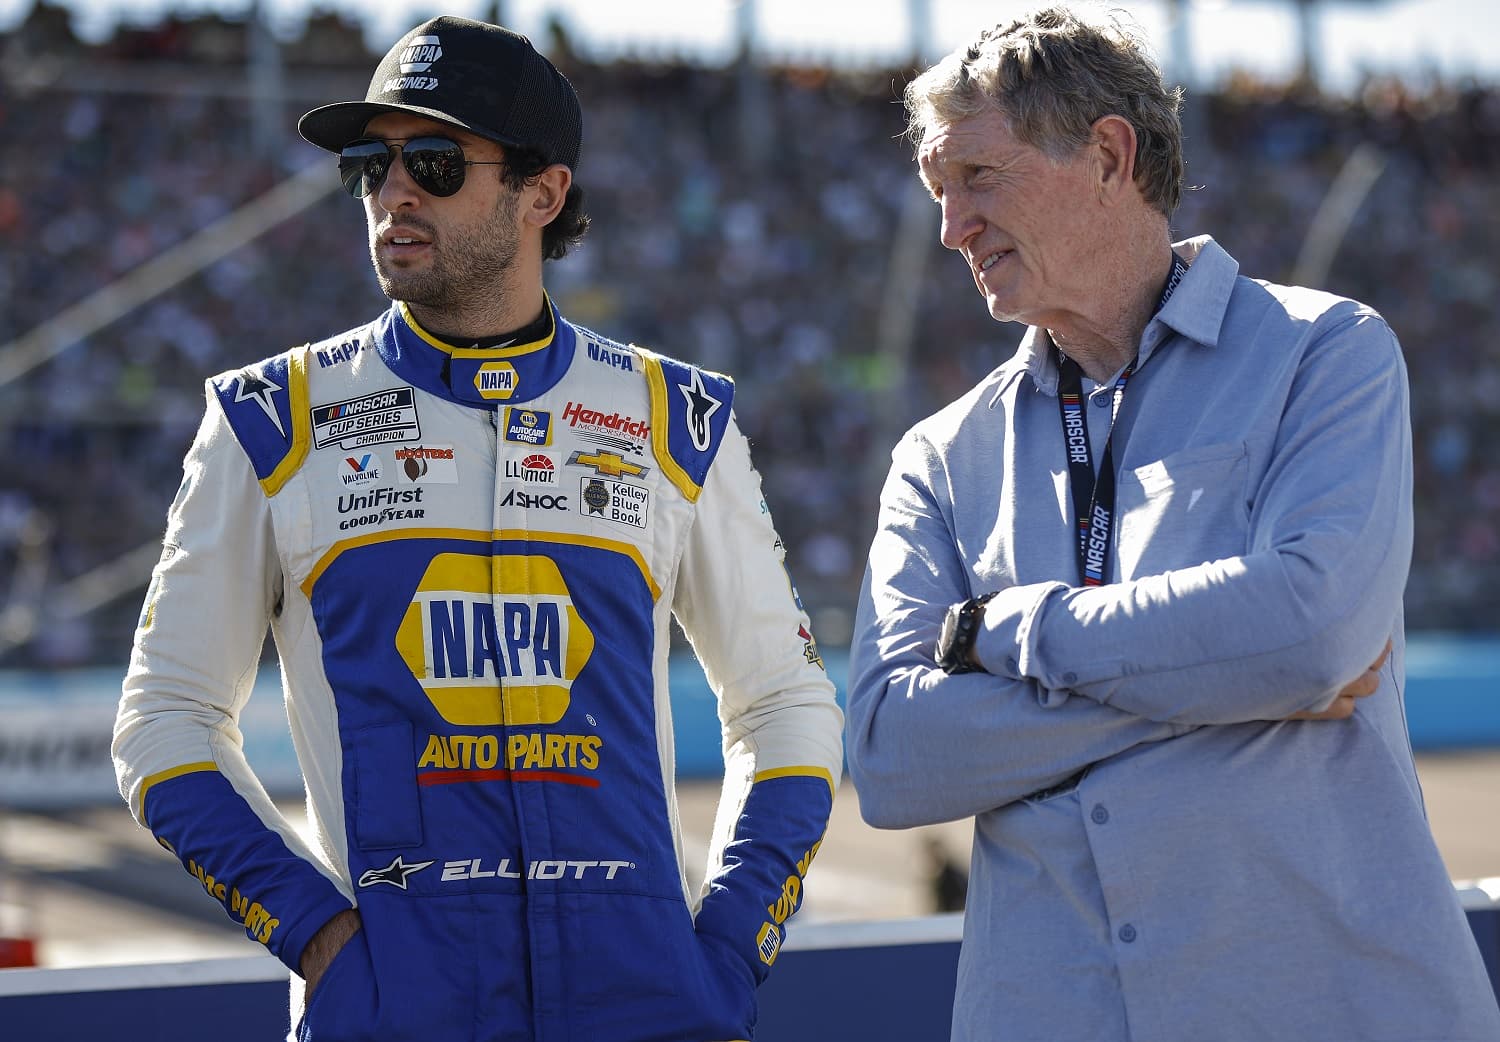 Chase Elliott talks to his father, Hall of Famer Bill Elliott, on the grid prior to the NASCAR Cup Series Championship at Phoenix Raceway on Nov. 6, 2022.